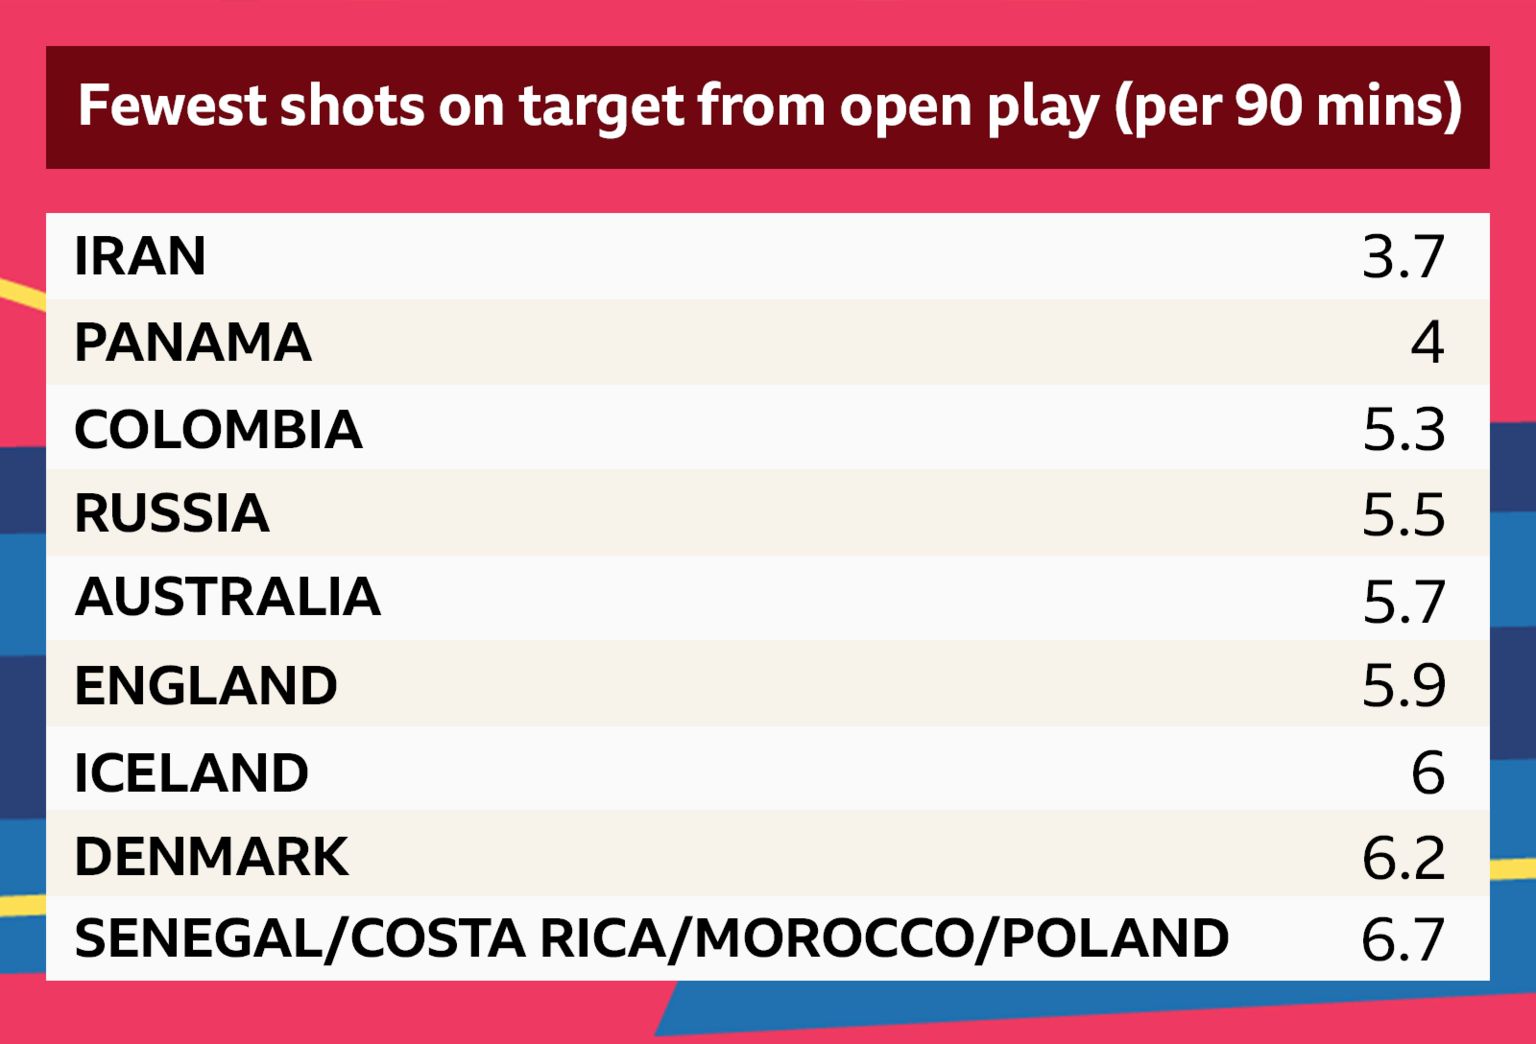 Graphic showing which teams had the fewest shots on target from open play per 90 minutes. Iran: 3.7 Panama 4 Colombia 5.3 Russia 5.5 Australia 5.7 England 5.9 Iceland 6 Denmark 6.2 Senegal, Costa Rica, Morocco and Poland 6.7